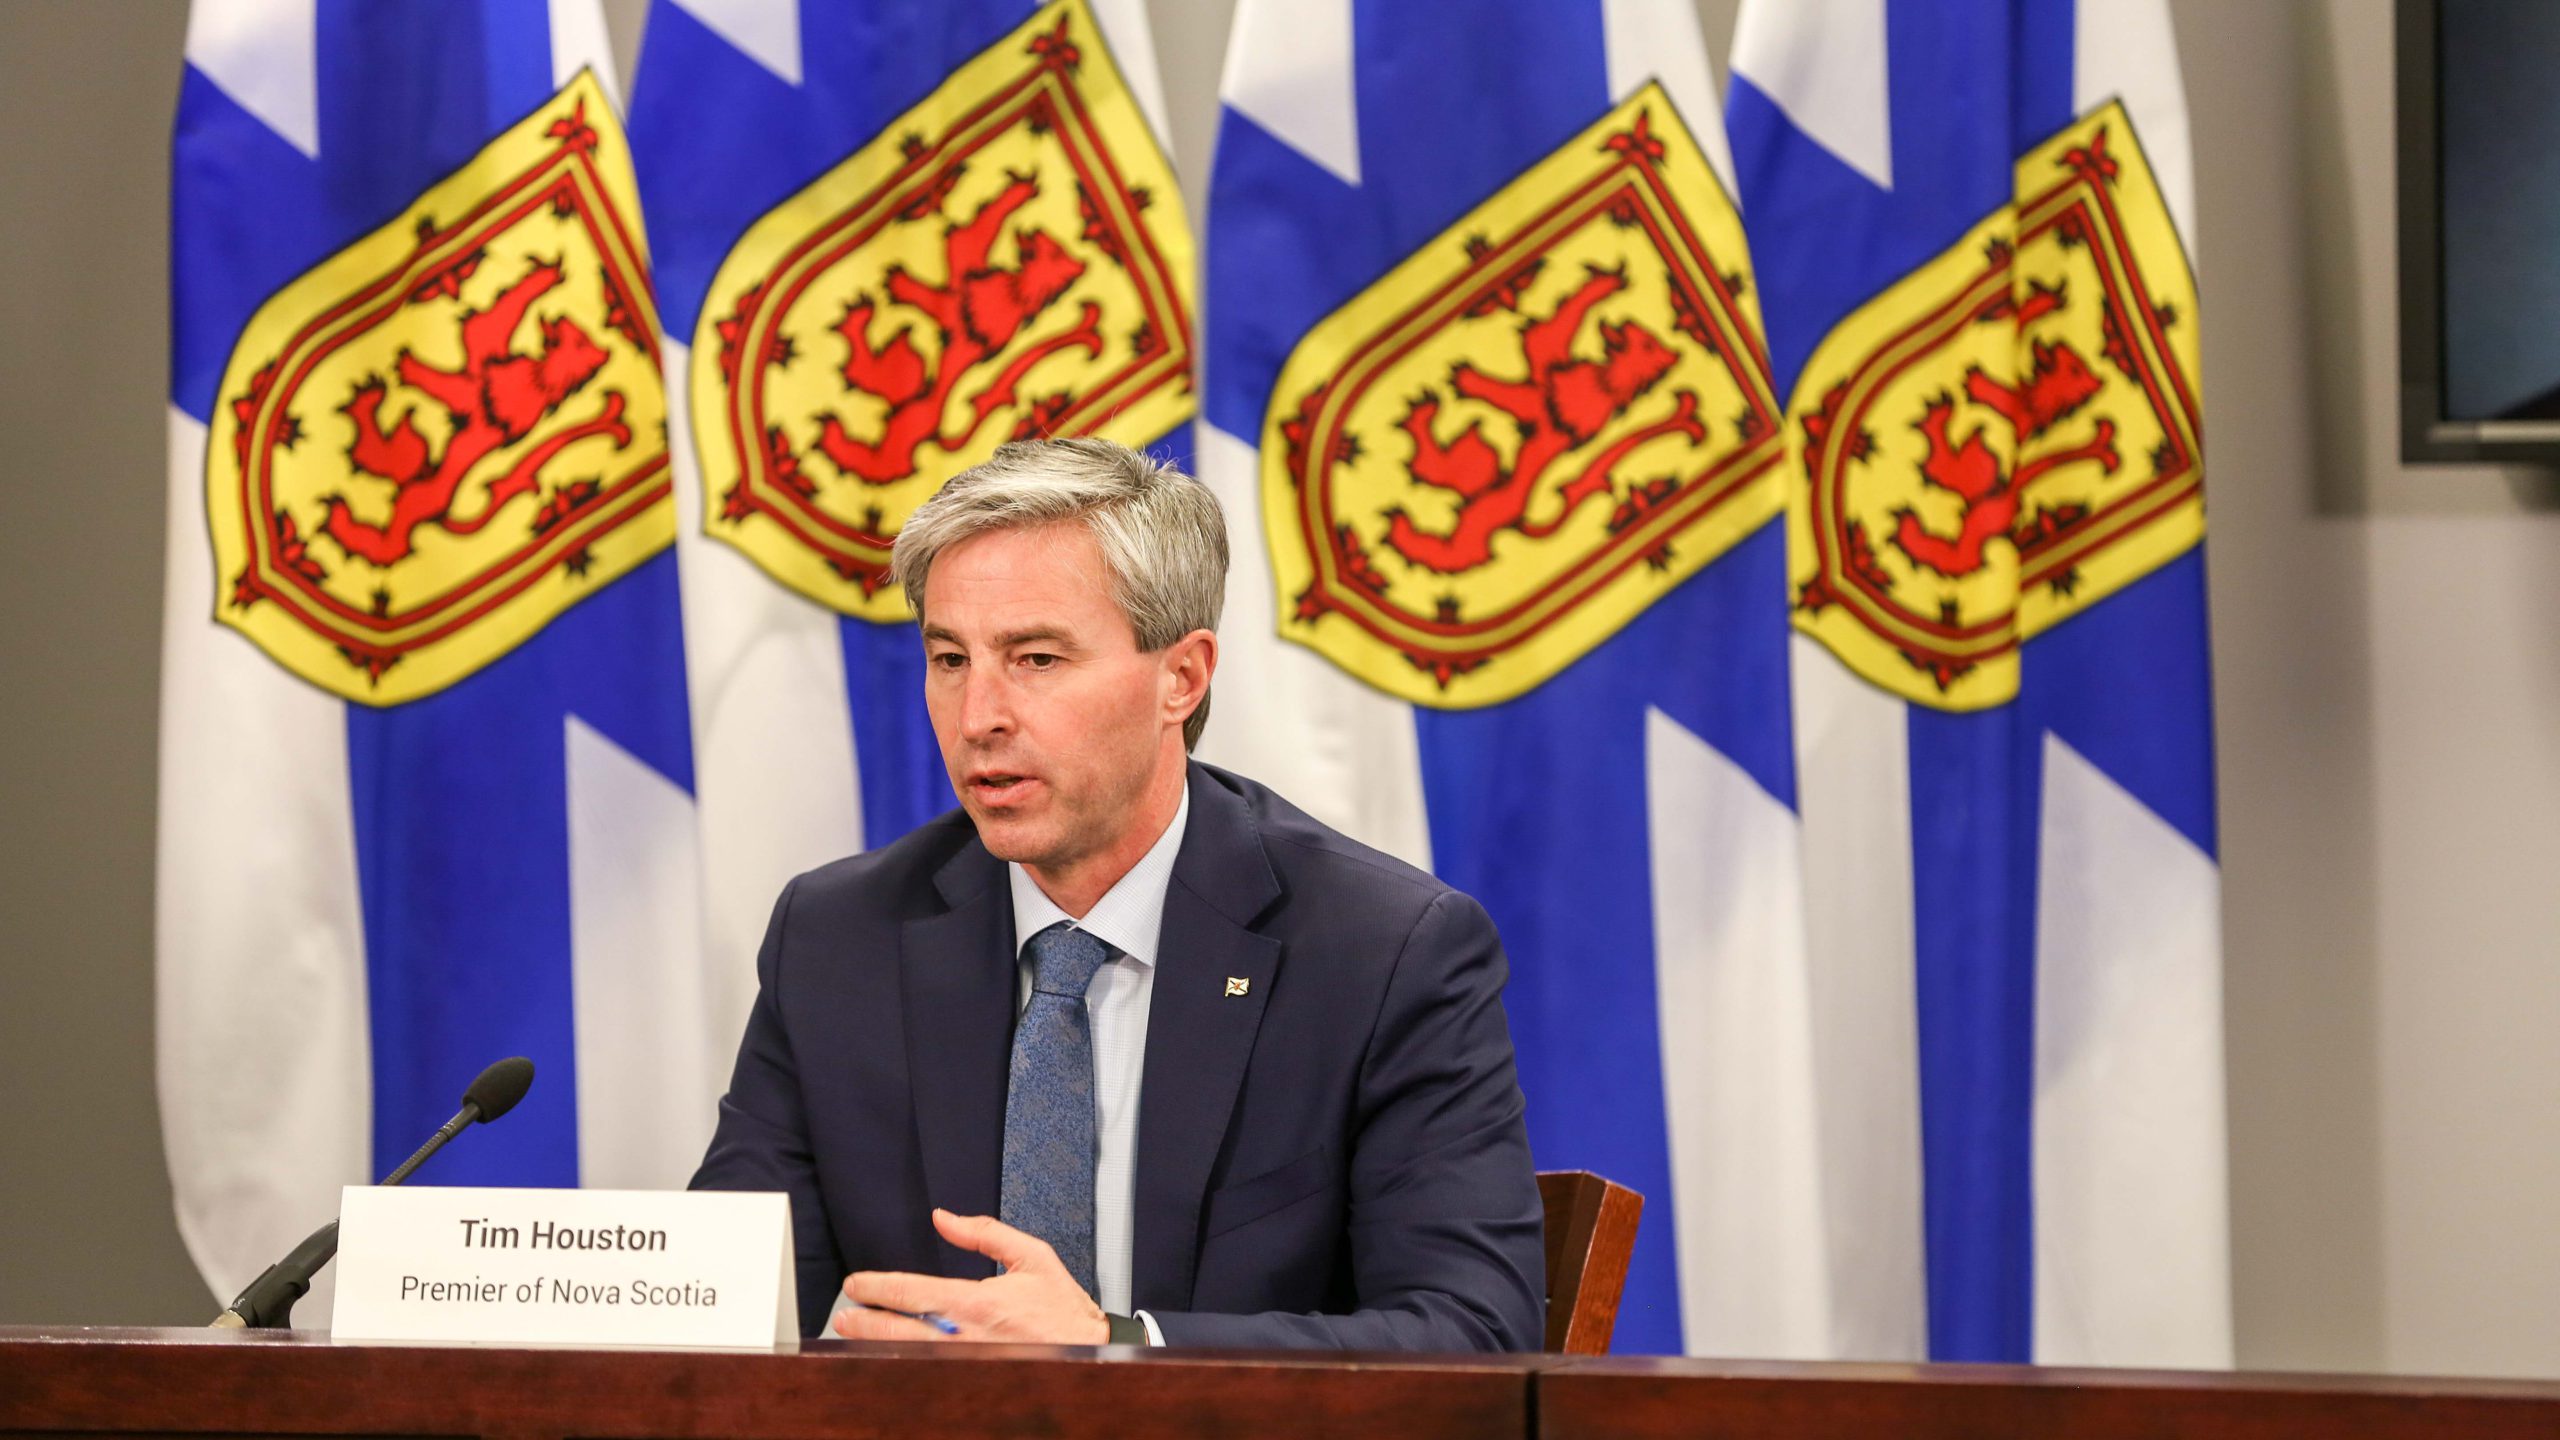 Premier Tim Houston sits at a desk in front of four Nova Scotian flags while speakings.